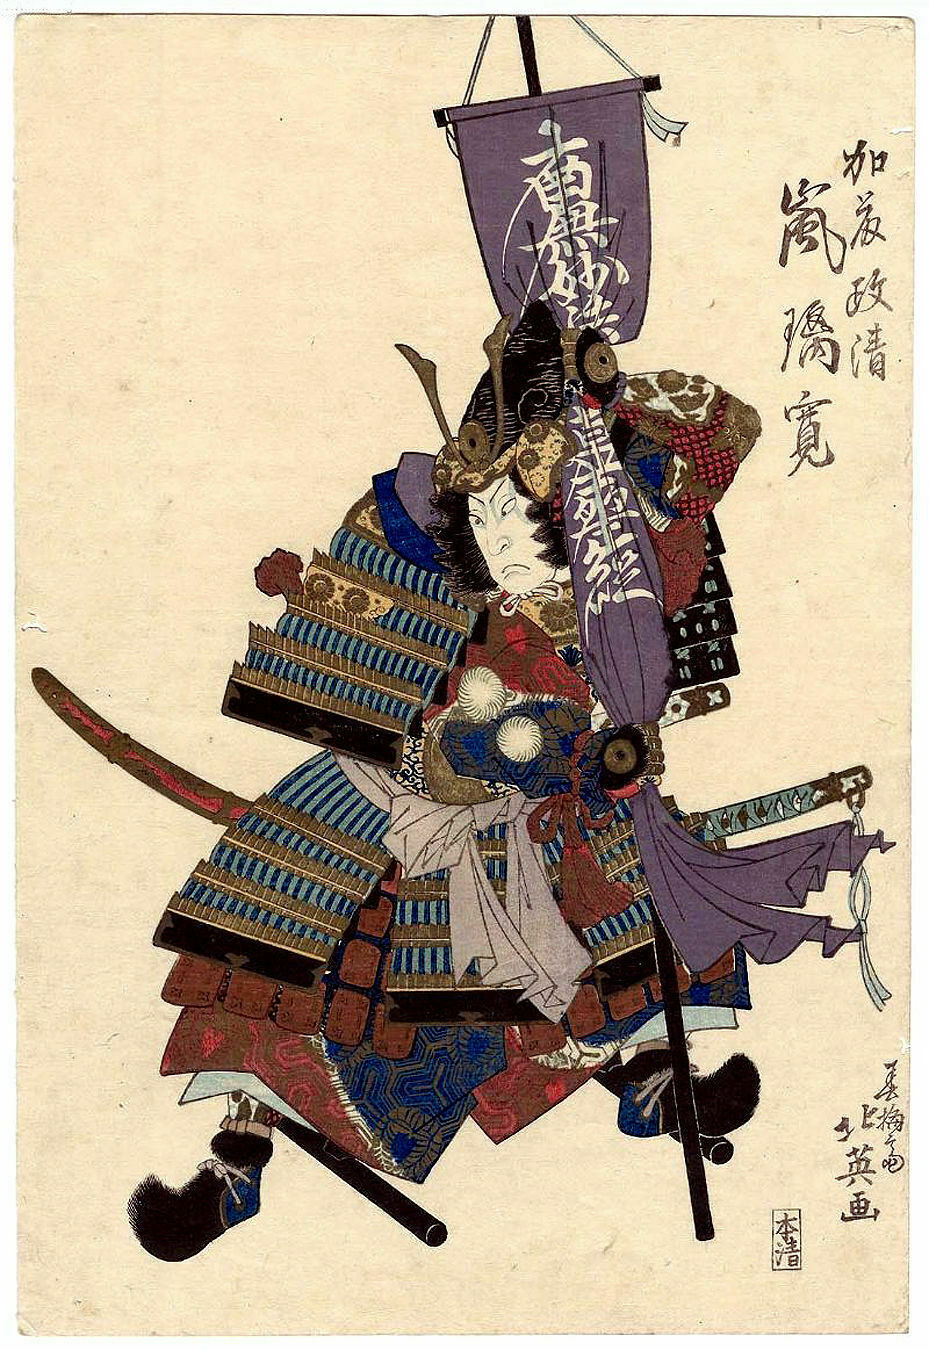 Japanese Repro Woodblock Print of a Samurai Warrior Pre-1800 Poster Picture